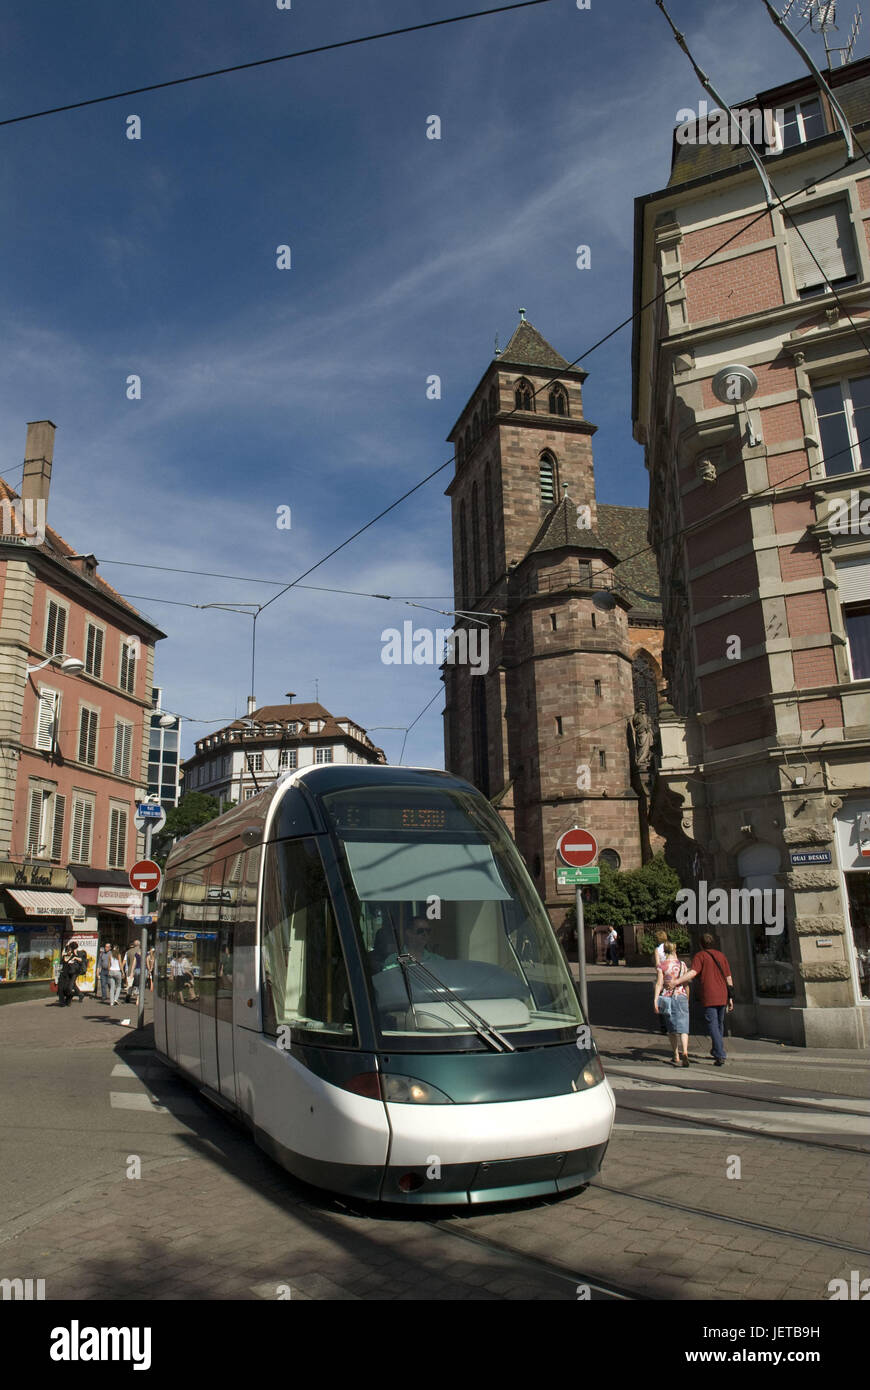 France, Alsace, Strasbourg, city centre, tram, pedestrian, Europe, destination, town, means of transportation, publicly, trajectory, rail transport, short-distance traffic, outside, people, tourists, buildings, houses, architecture, Stock Photo